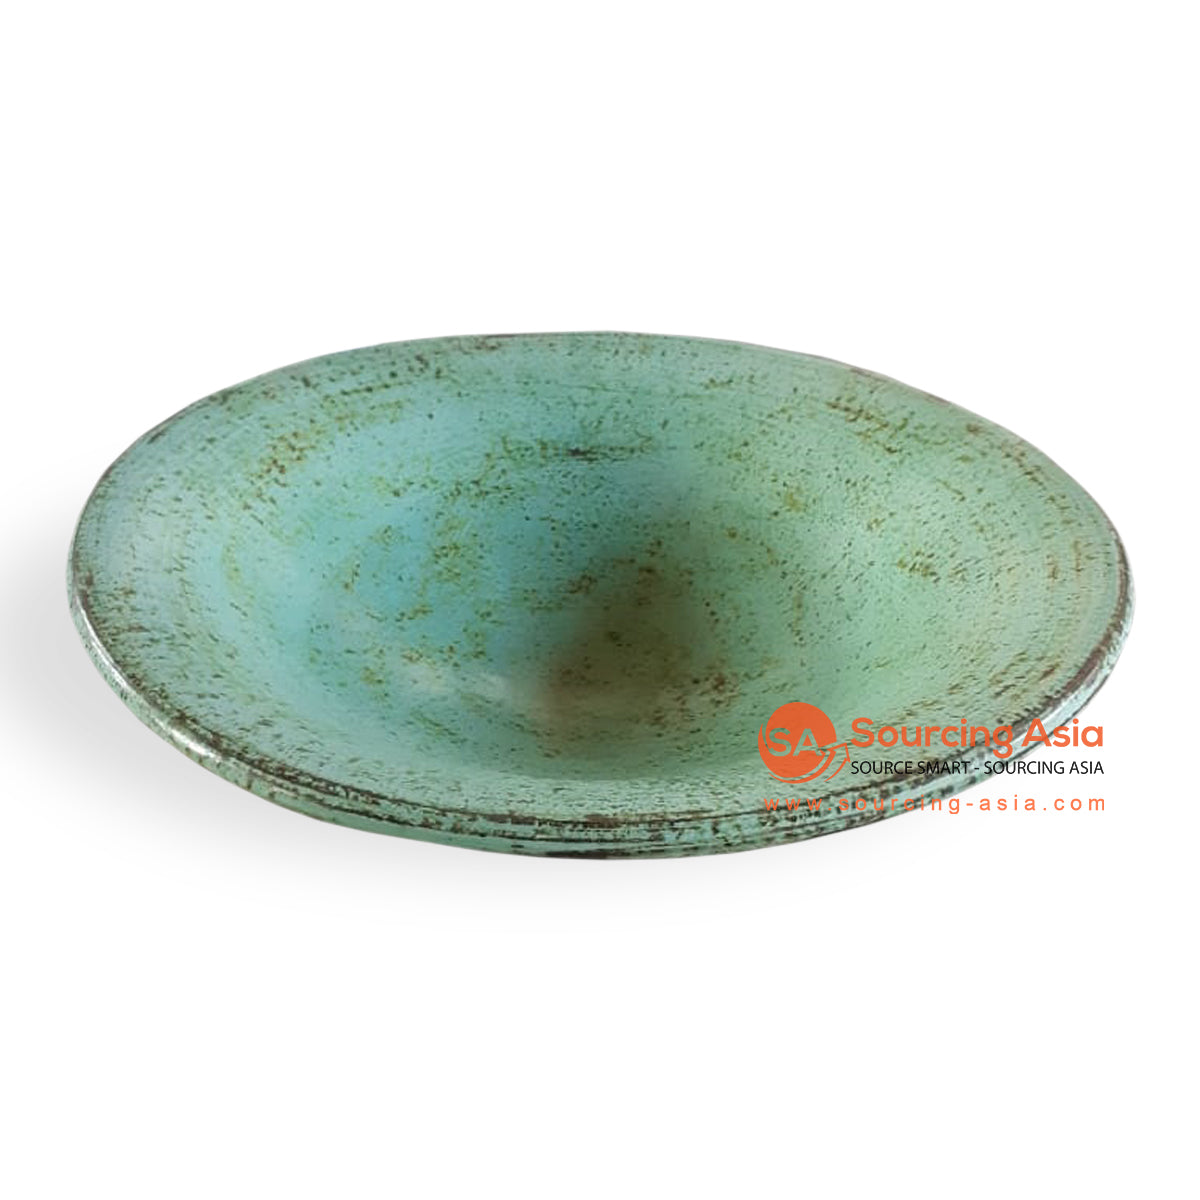 JNP128-KY23 ANTIQUE TURQUOISE TERRACOTTA ROUND PLATE